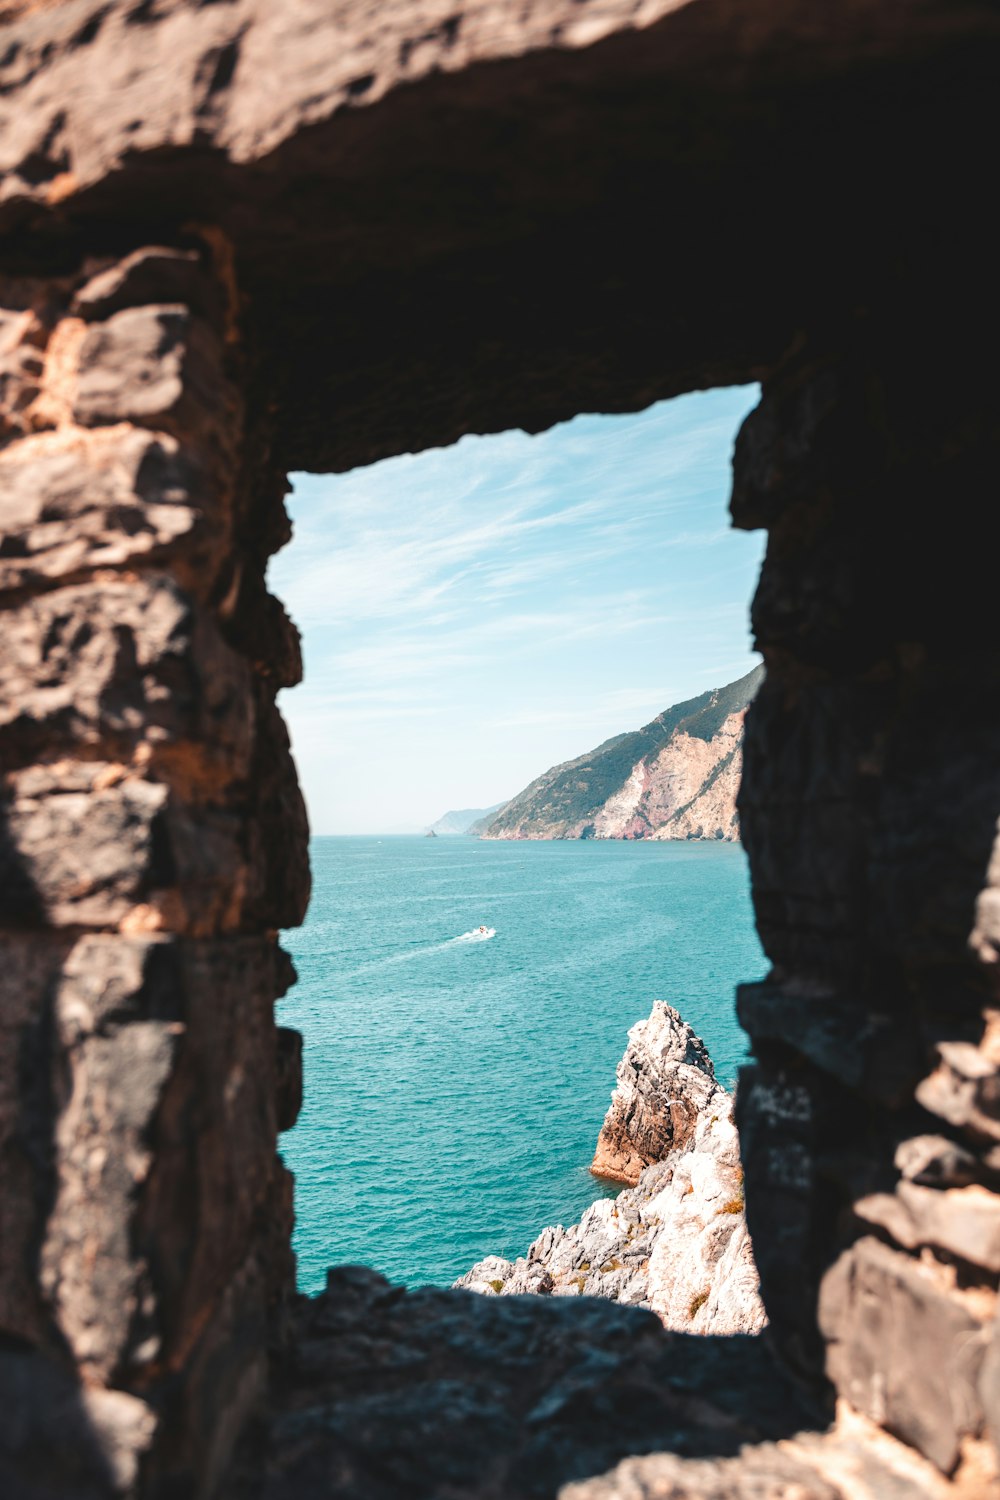 a view of a body of water through a hole in a rock wall